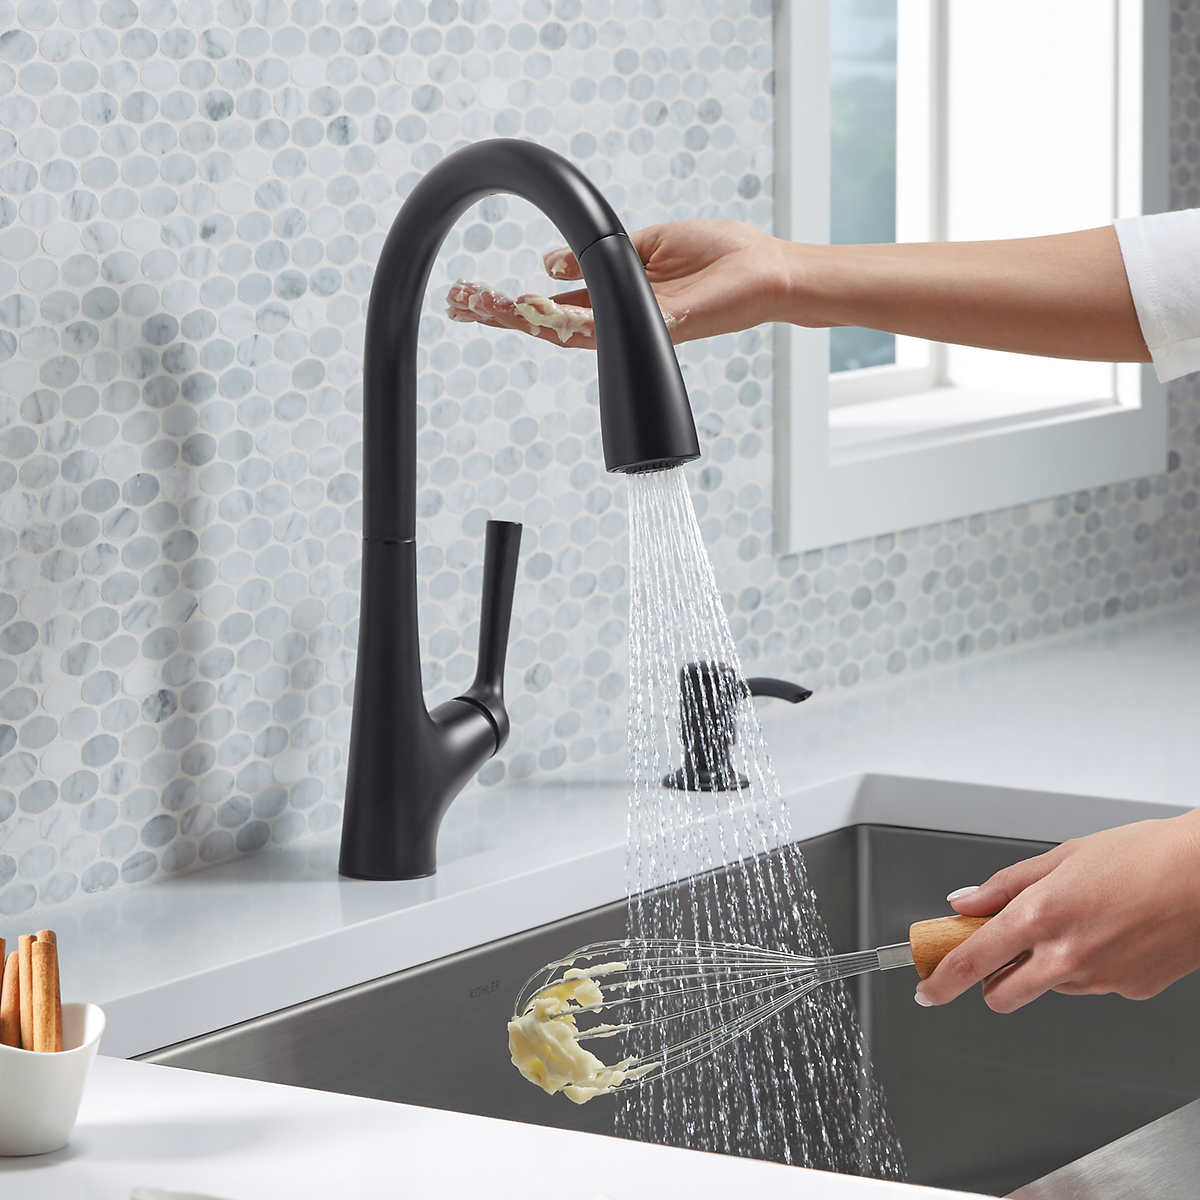 Kohler Malleco Touchless Pull Down Kitchen Faucet With Soap Dispenser